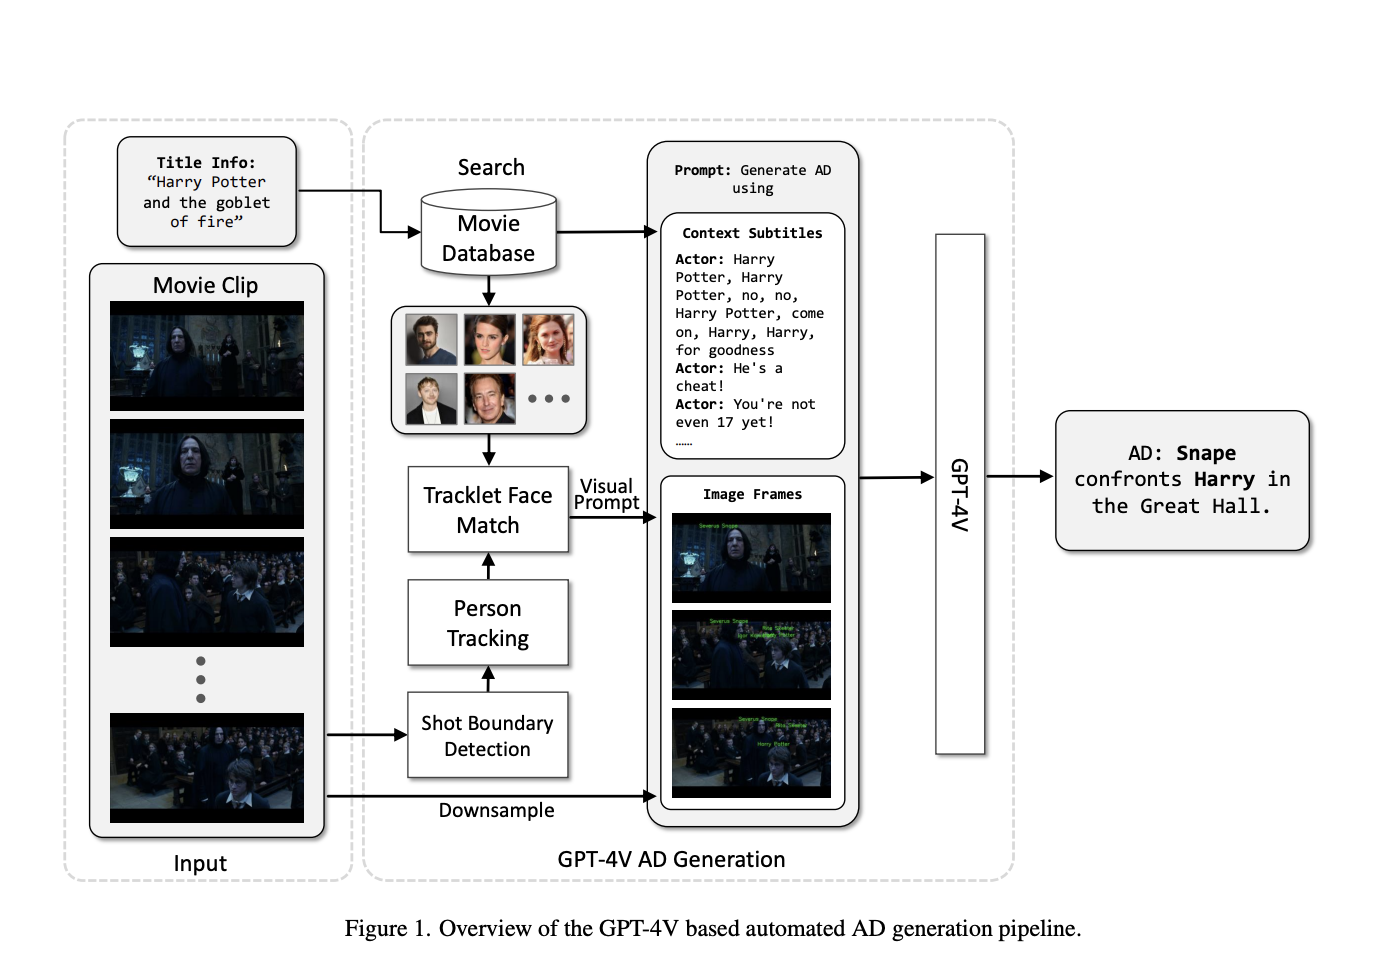  Microsoft AI Proposes an Automated Pipeline that Utilizes GPT-4V(ision) to Generate Accurate Audio Description AD for Videos